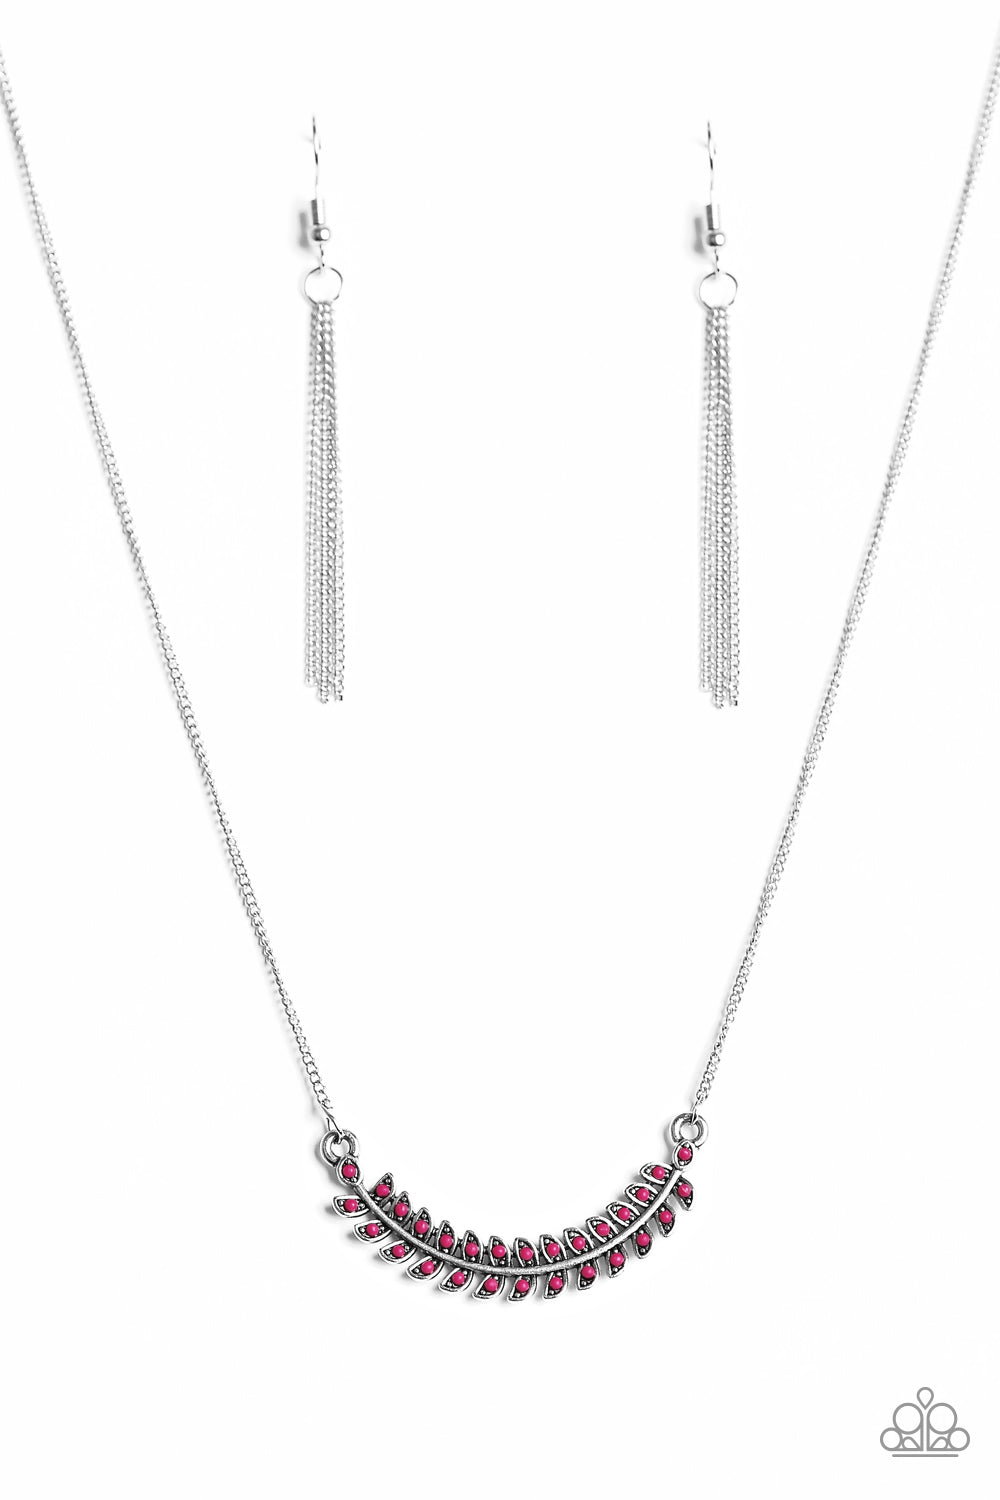 Paparazzi Accessories Flying Colors - Pink Necklace & Earrings 